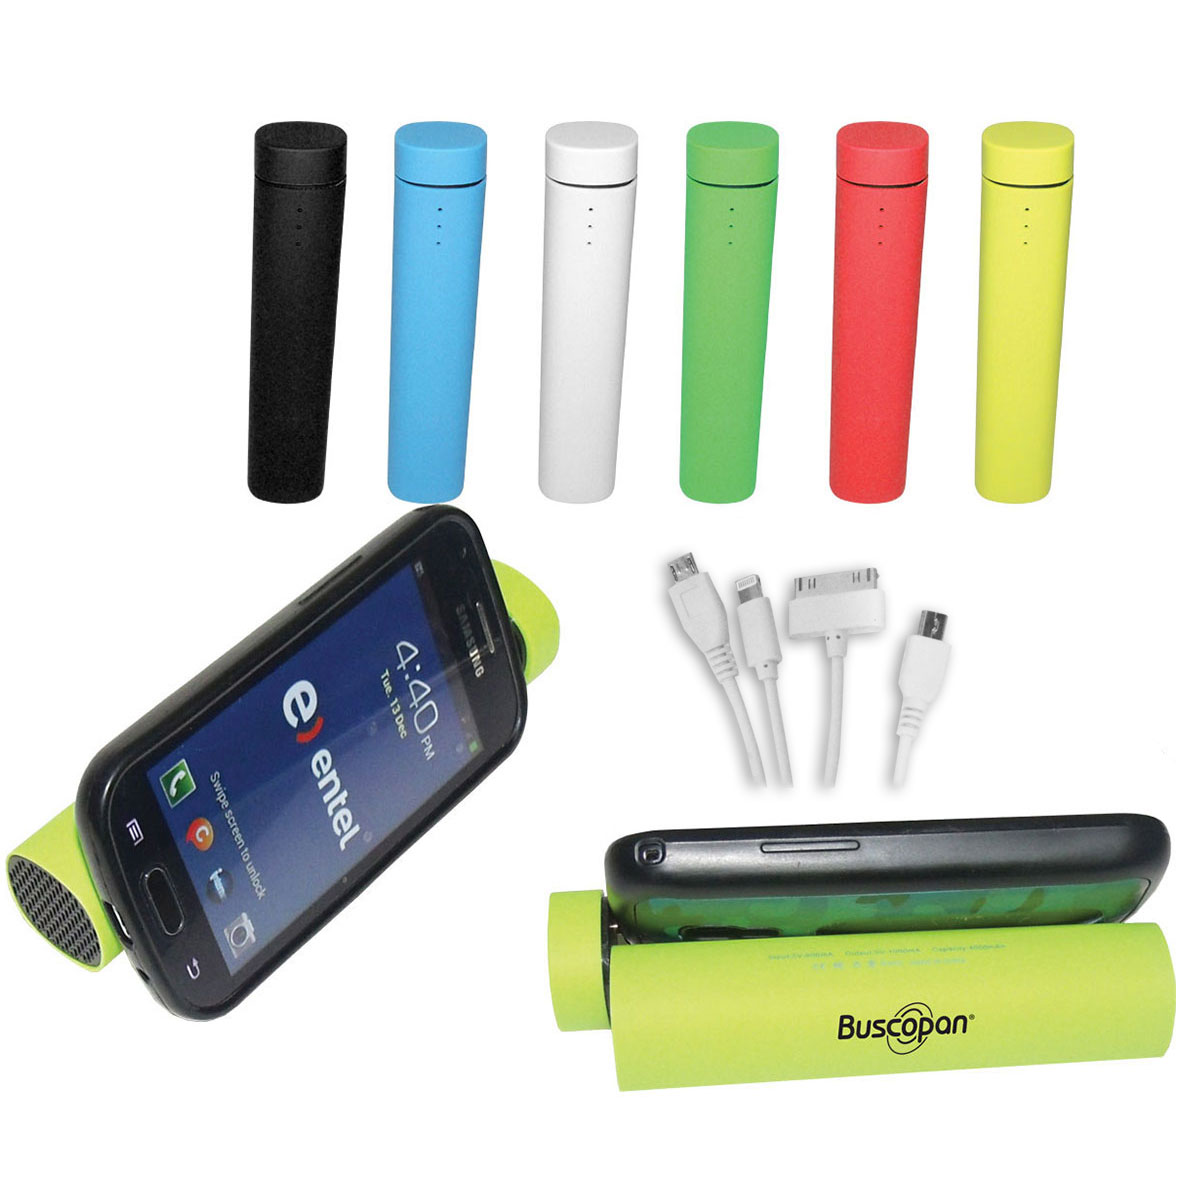 Bluetooth Stereo Power Bank